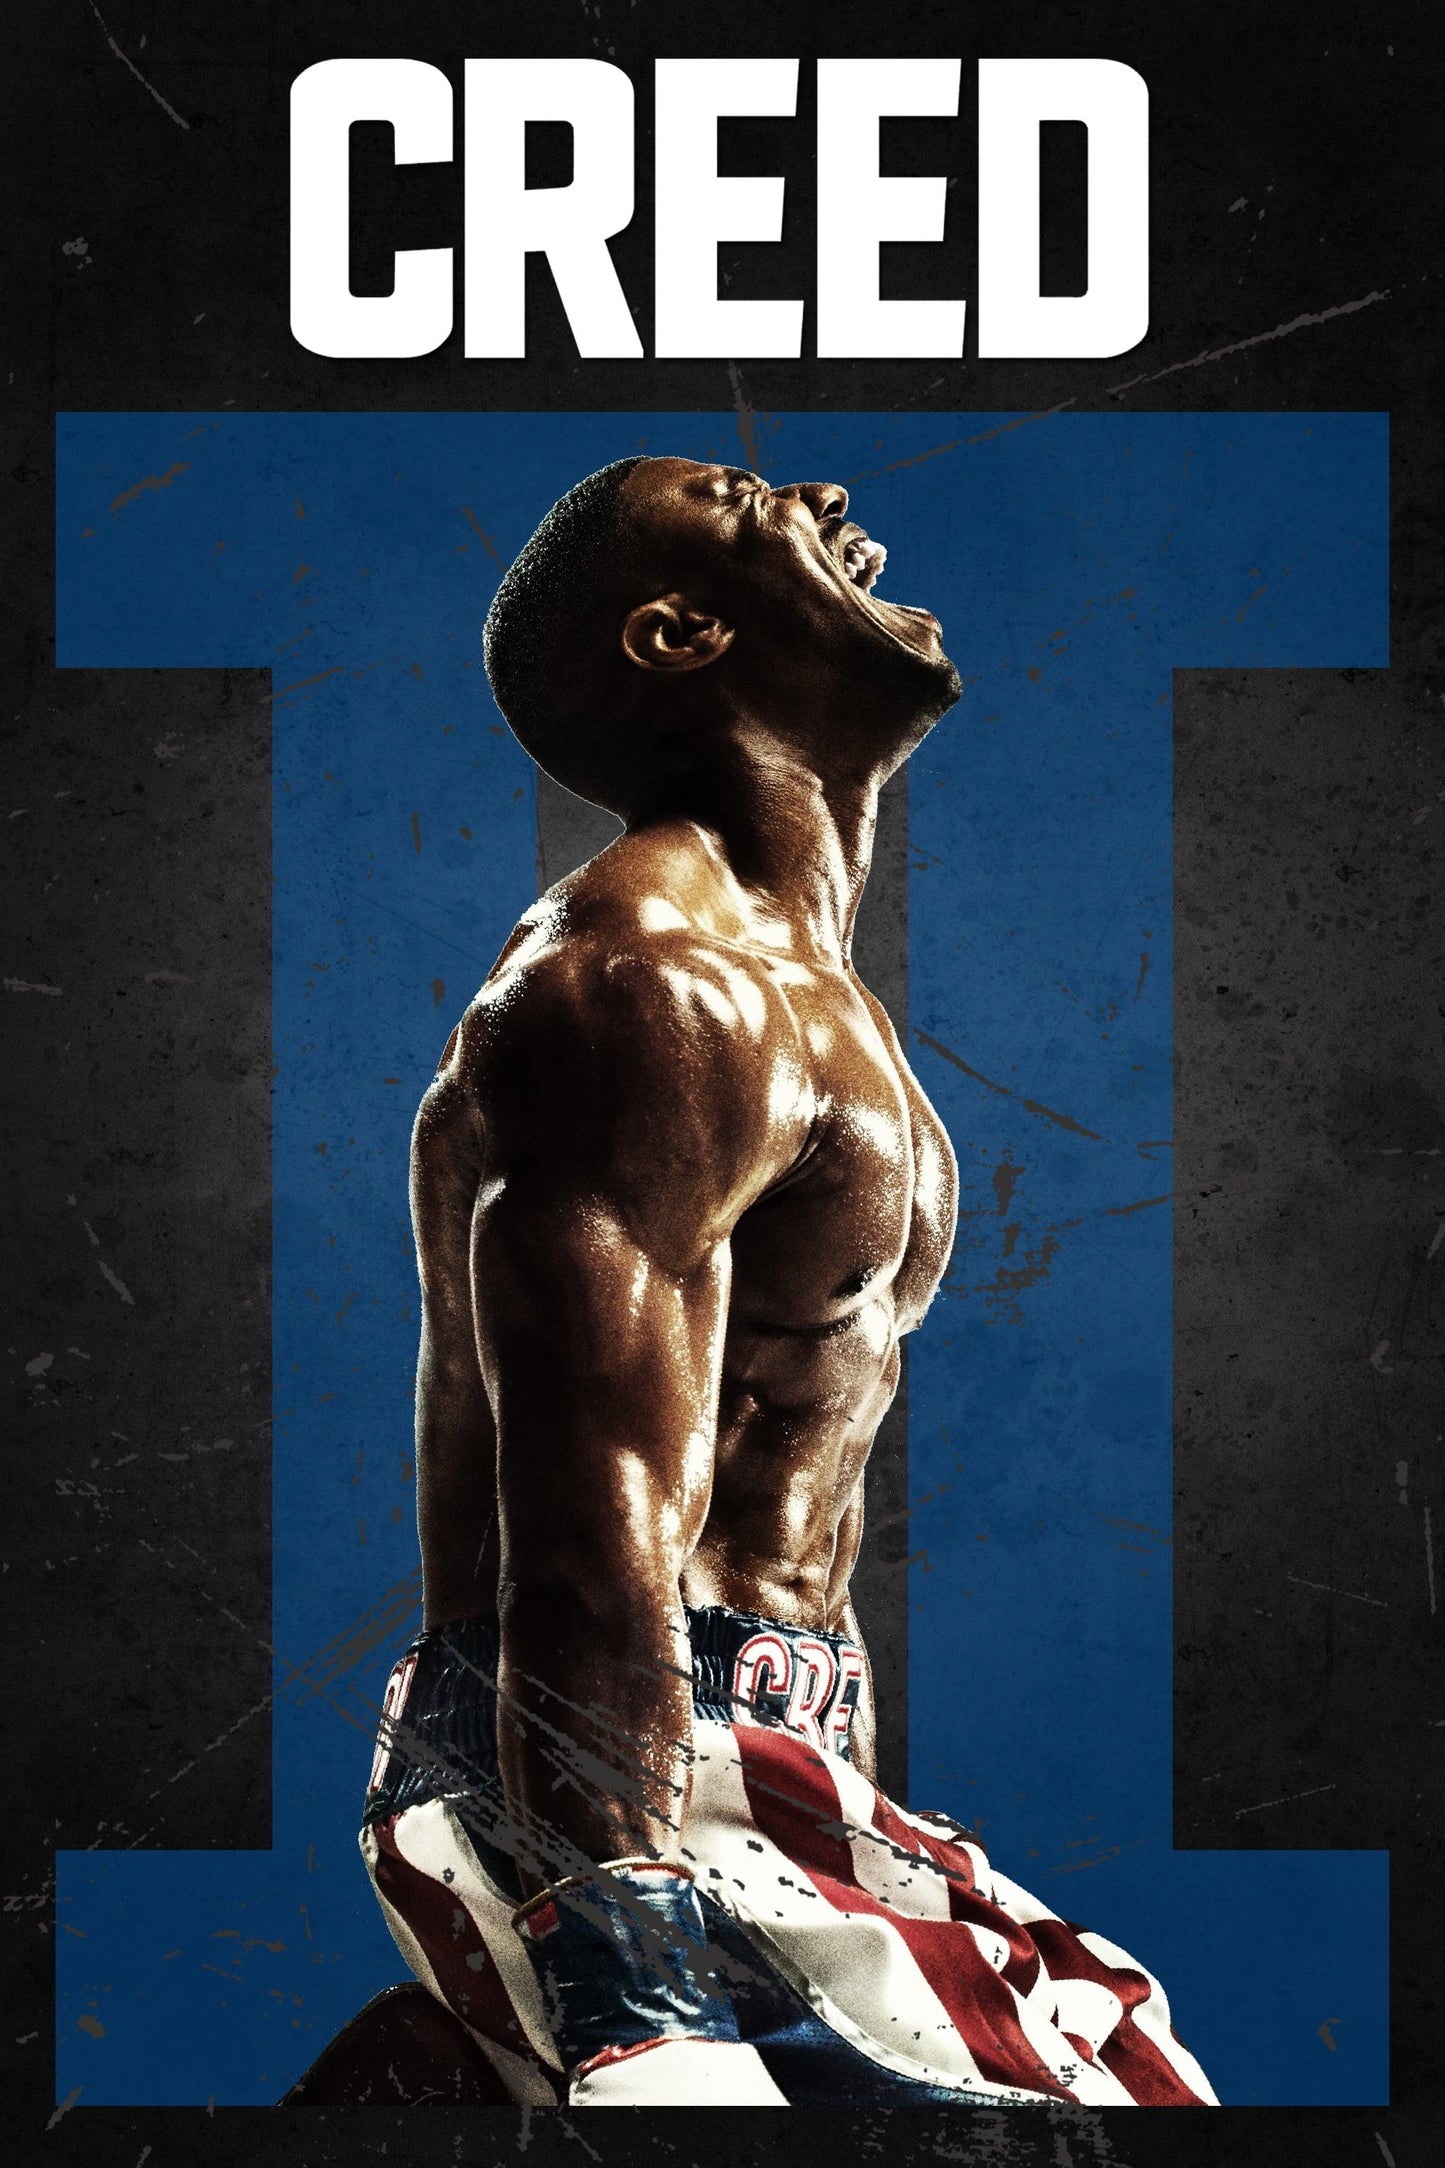 Creed II Boxing Movie Poster - Aesthetic Wall Decor